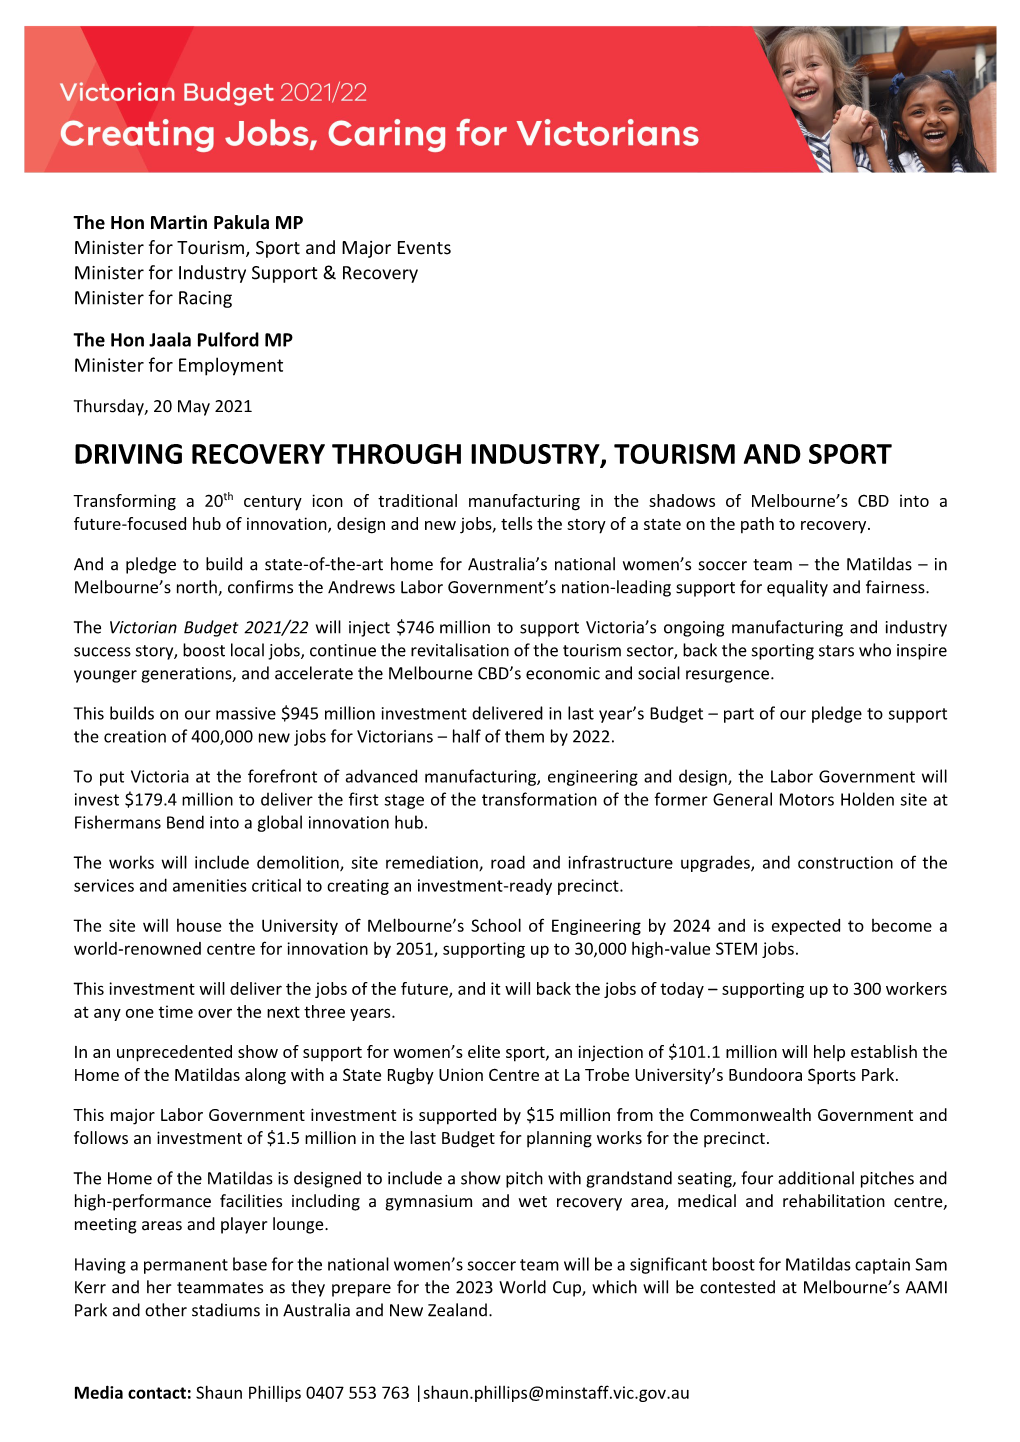 Driving Recovery Through Industry, Tourism and Sport